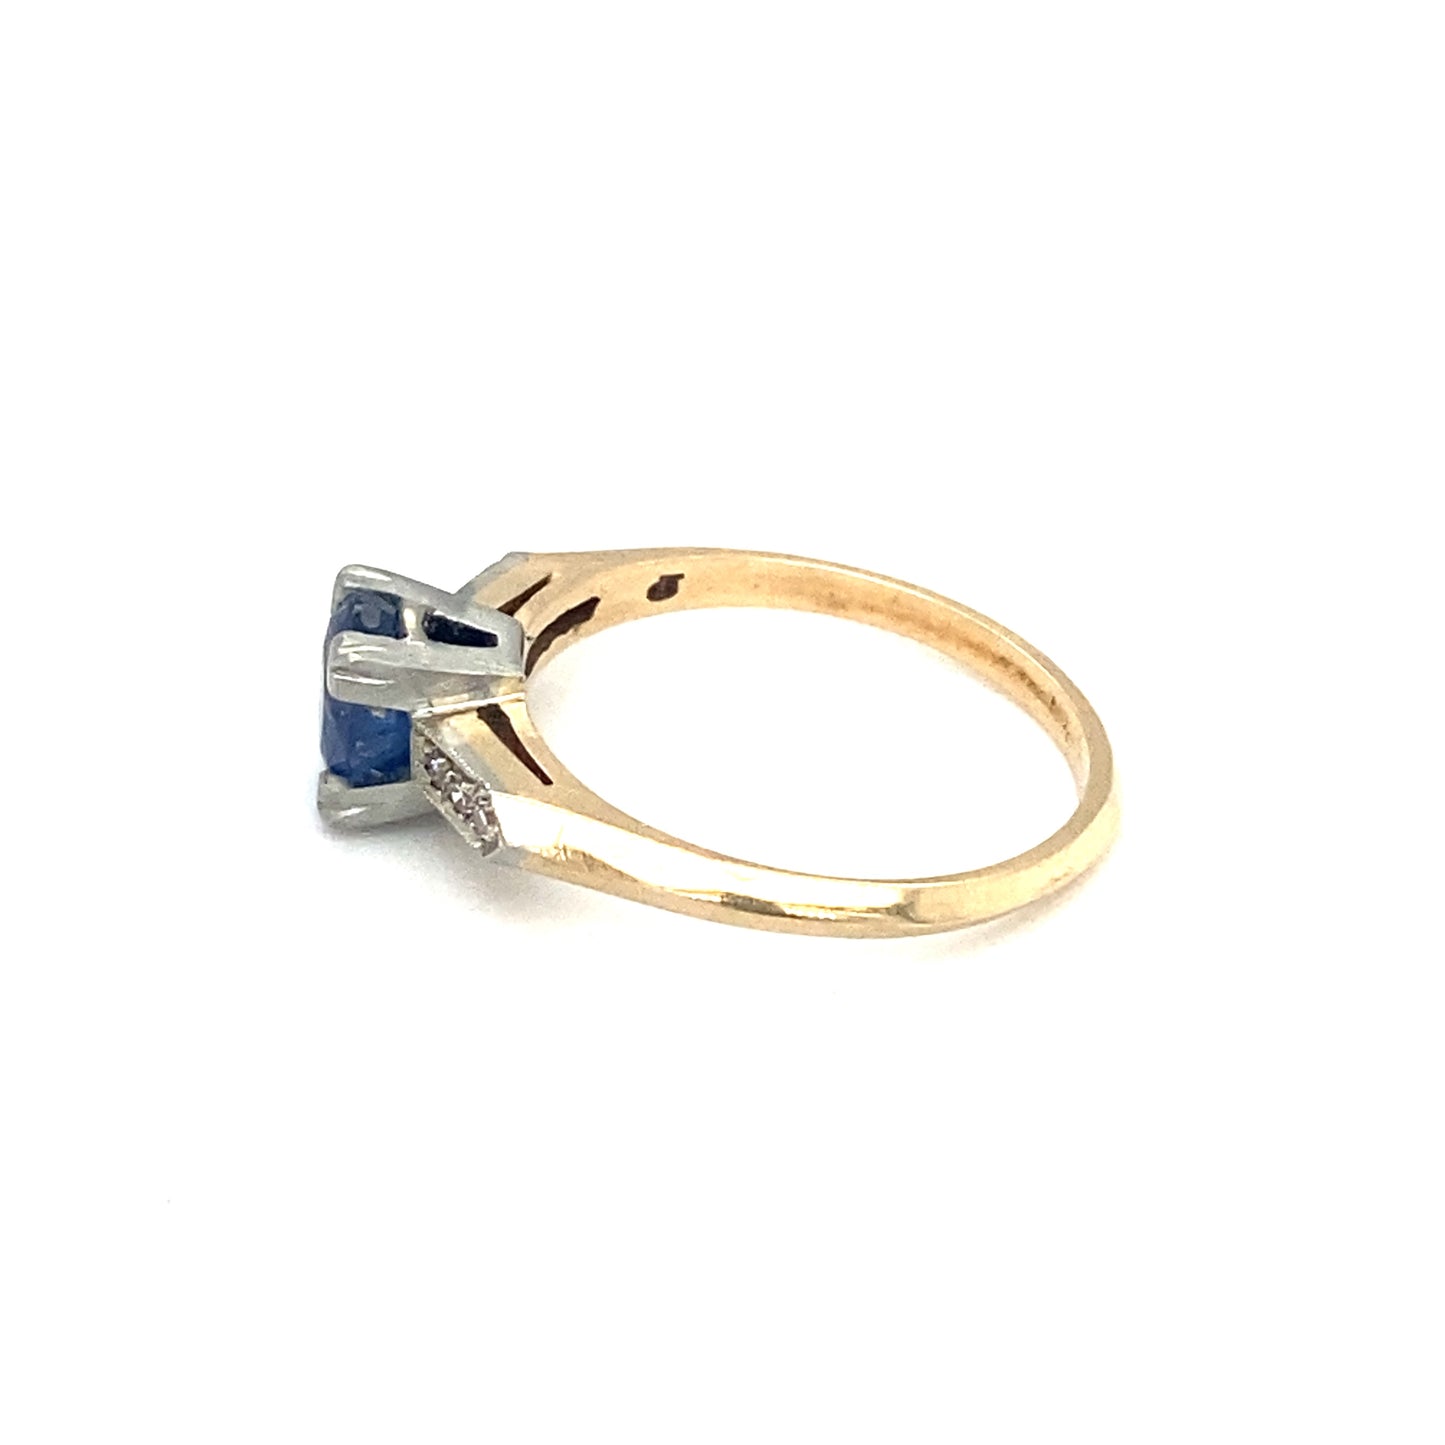 Circa 1920s 1.0ct Oval No Heat Sapphire and Diamond Ring in Two Tone Gold